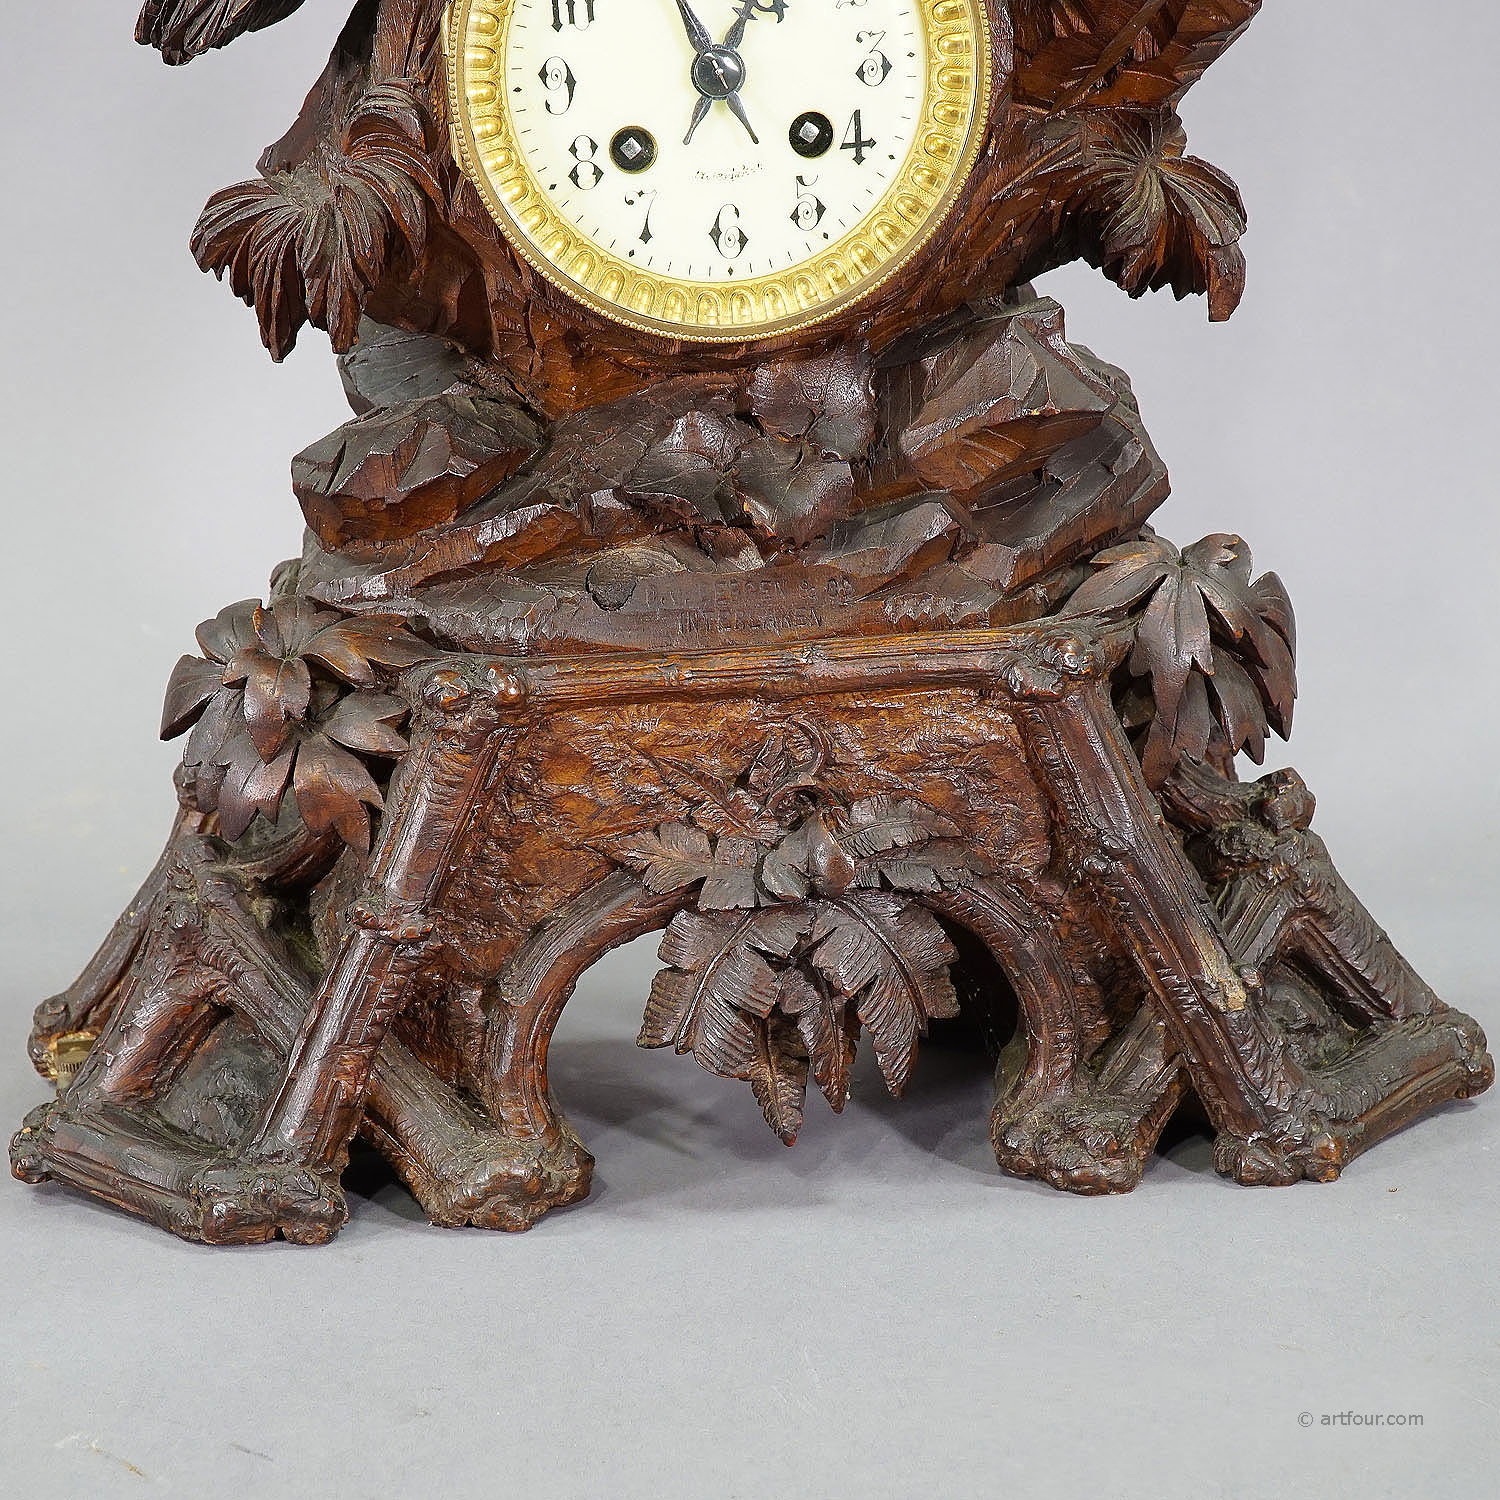 Antique Wooden Mantel Clock with Eagle, Swiss 1900